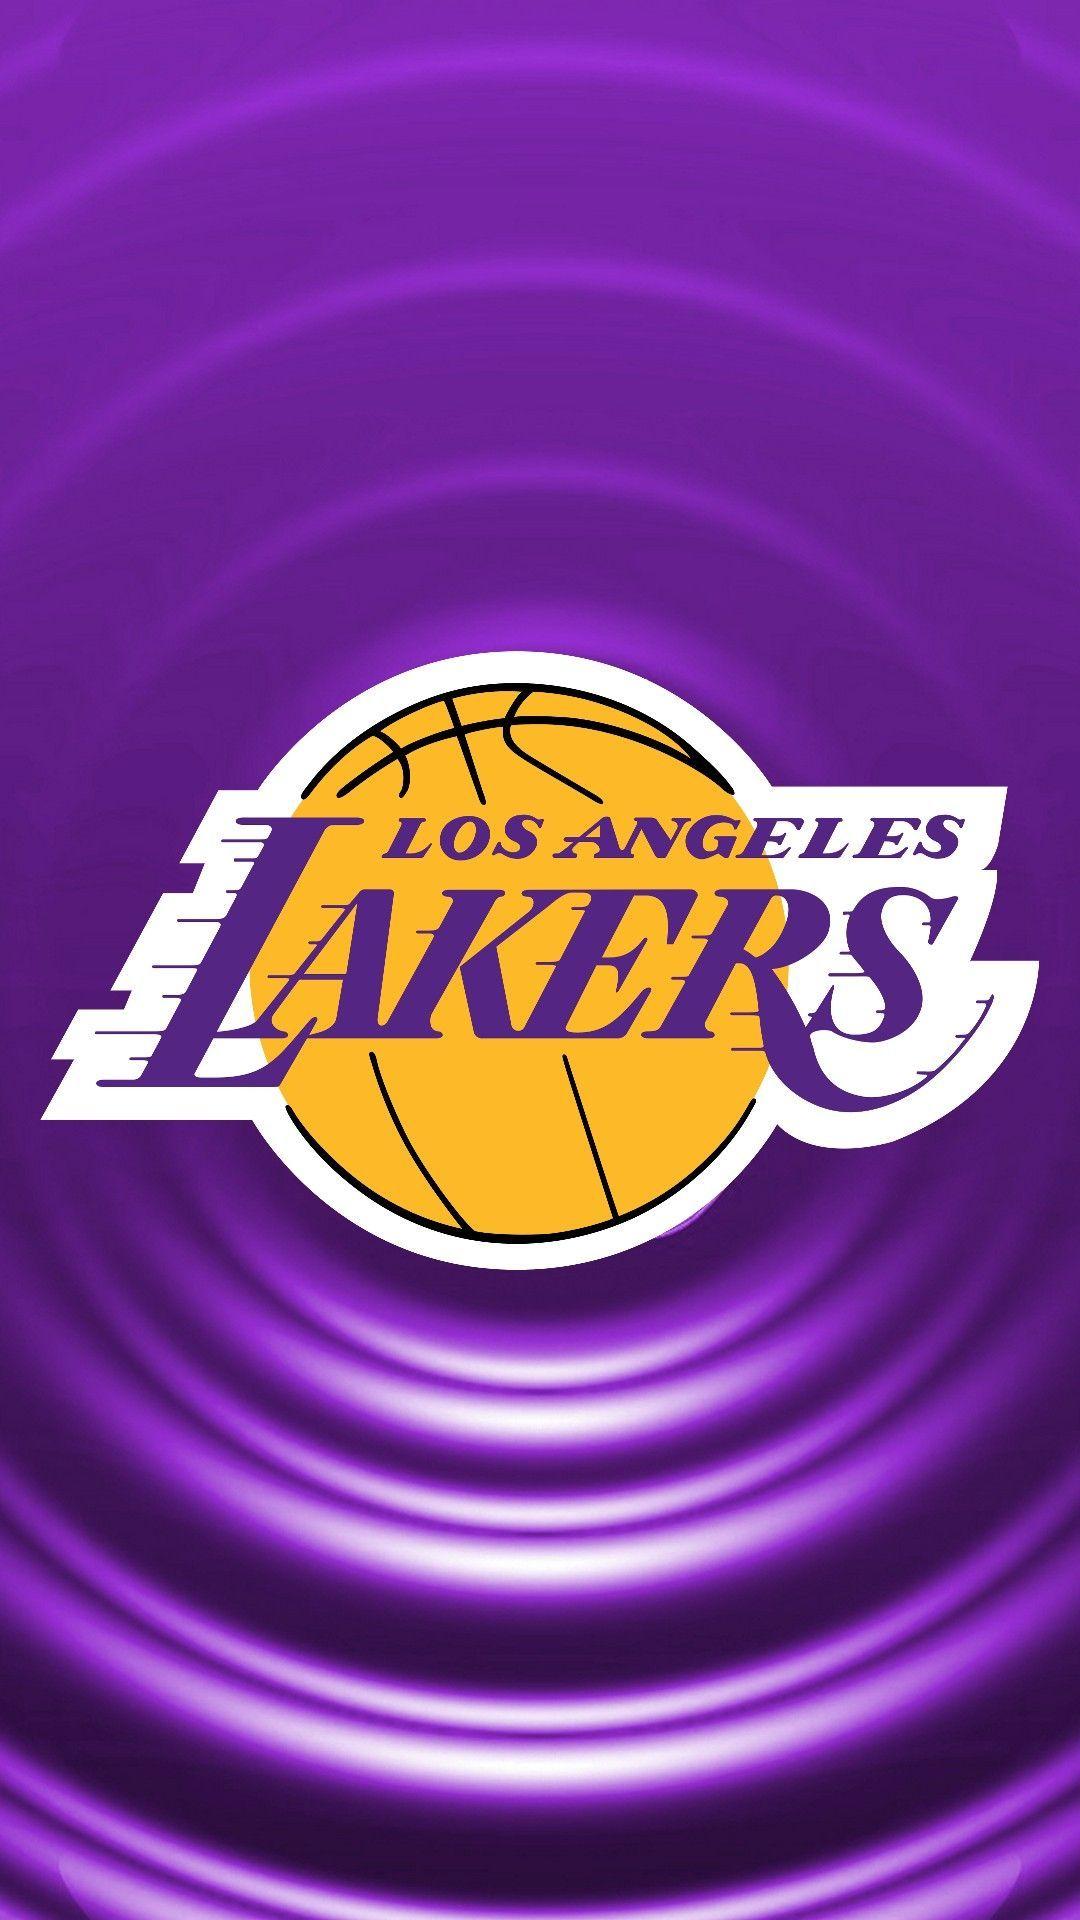 Lakers iPhone 8 Wallpaper with high-resolution 1080x1920 pixel. You can use this wallpaper for your iPhone 5, 6, 7, 8, X, XS, XR backgrounds, Mobile Screensaver, or iPad Lock Screen - Los Angeles Lakers